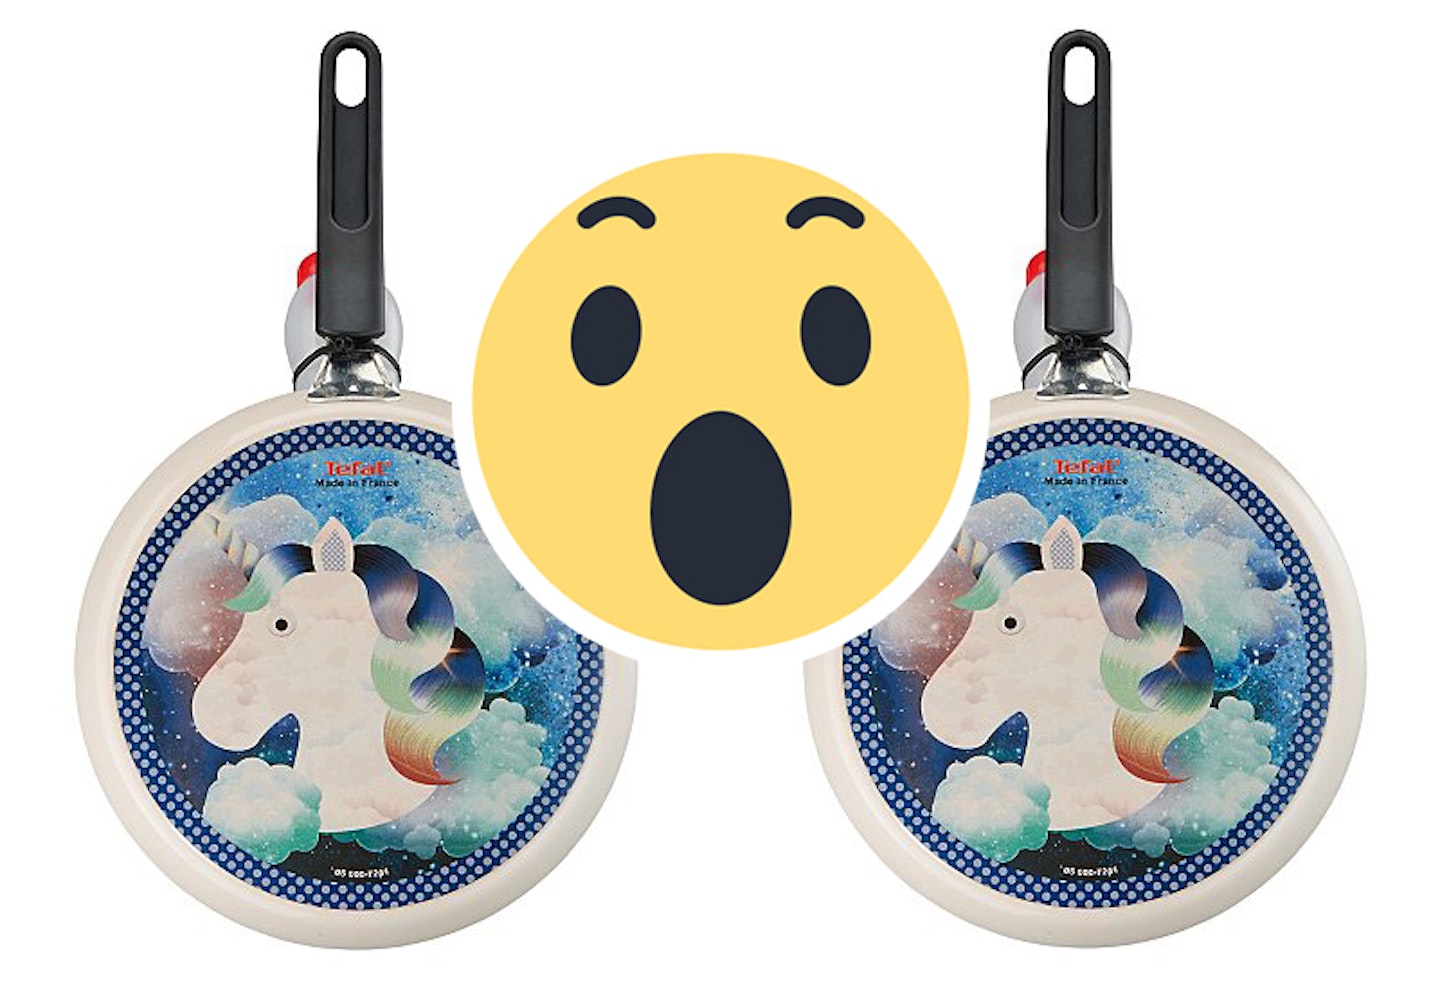 Asda have launched a UNICORN Pancake pan in time for Pancake Day!